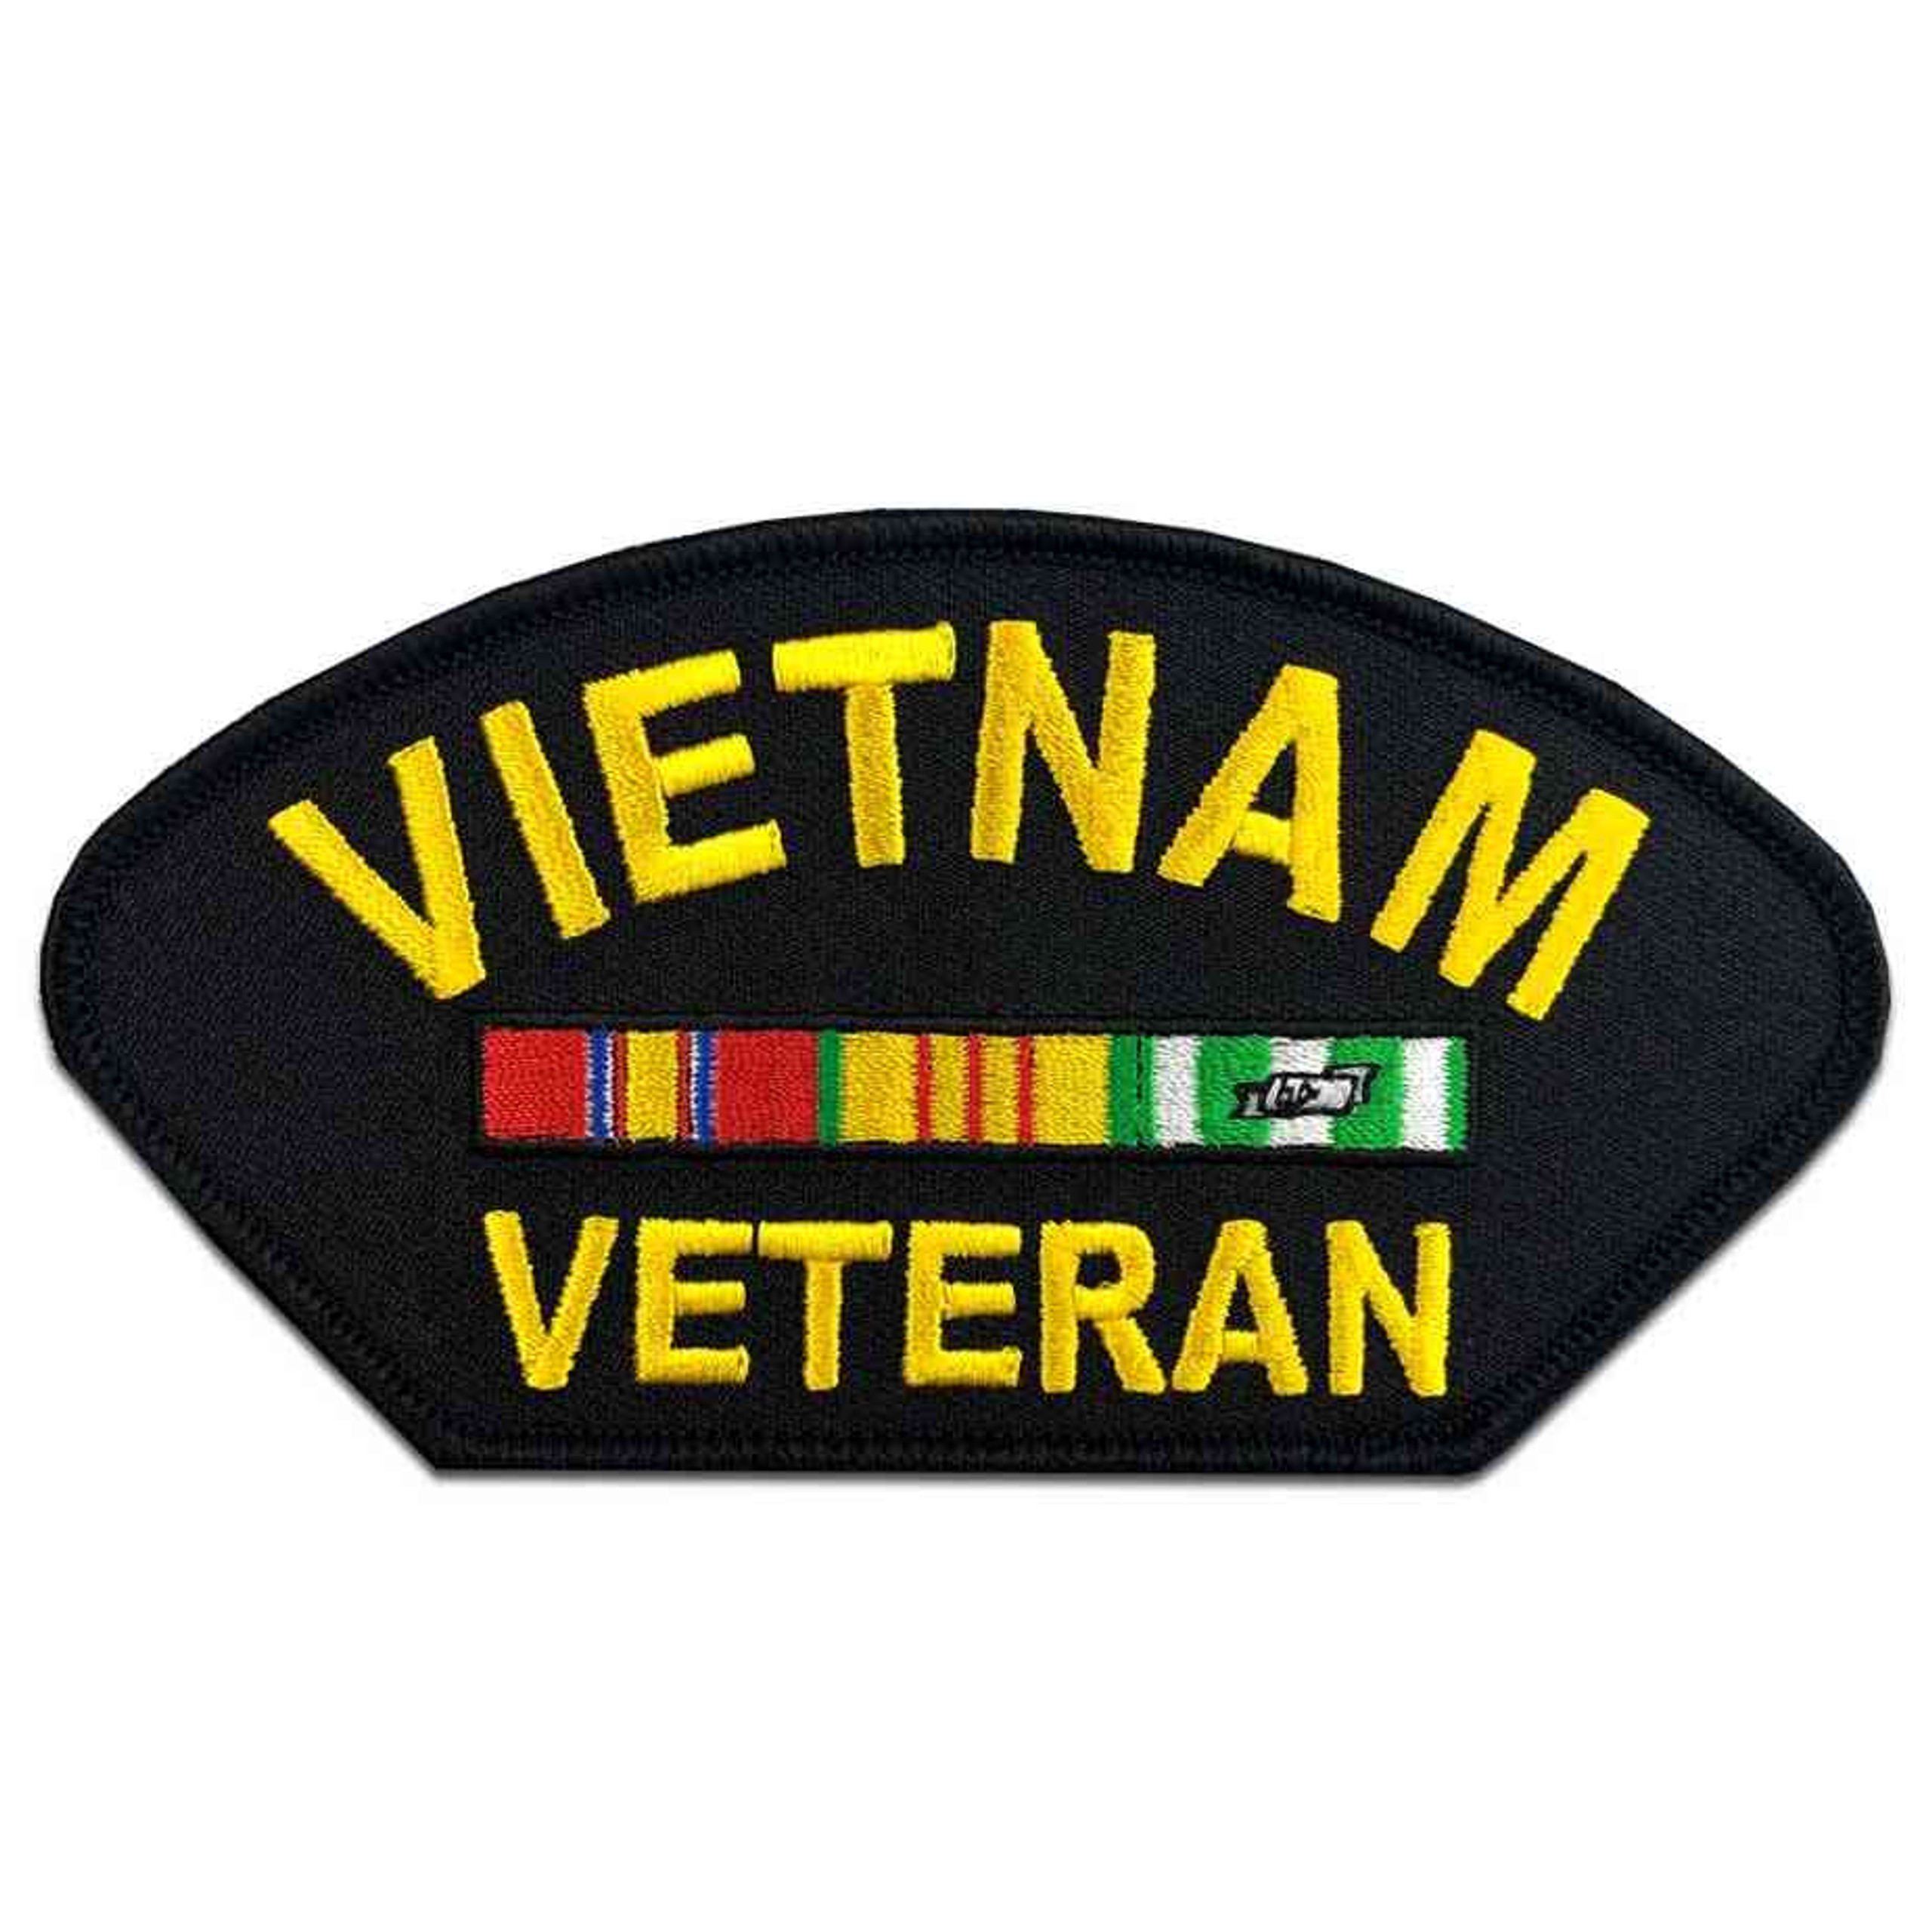 Vietnam Veteran Patch With 3 Medals Graphic